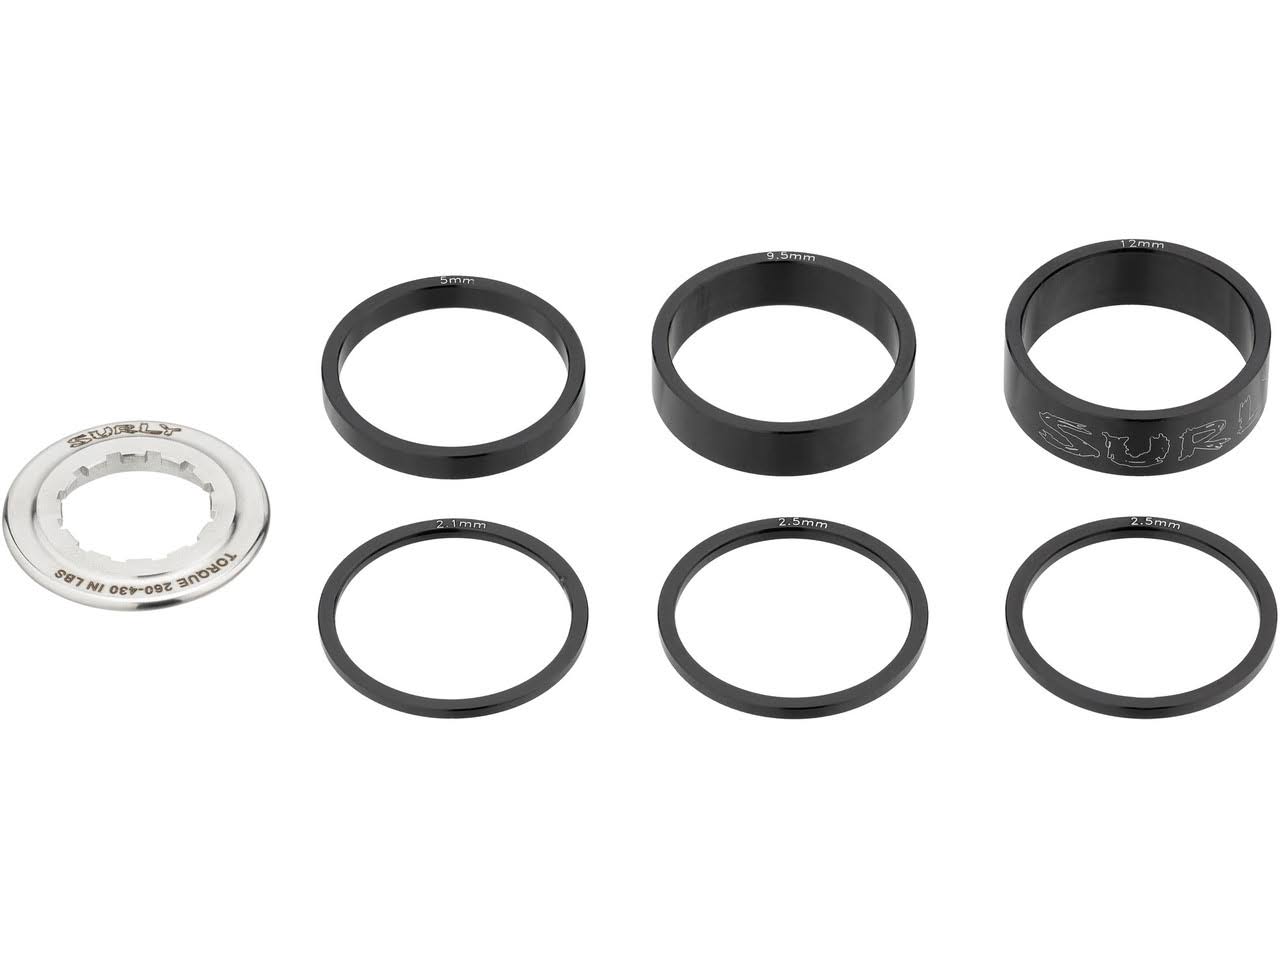 Surly Single-Speed Spacer Kit - Black, One Size